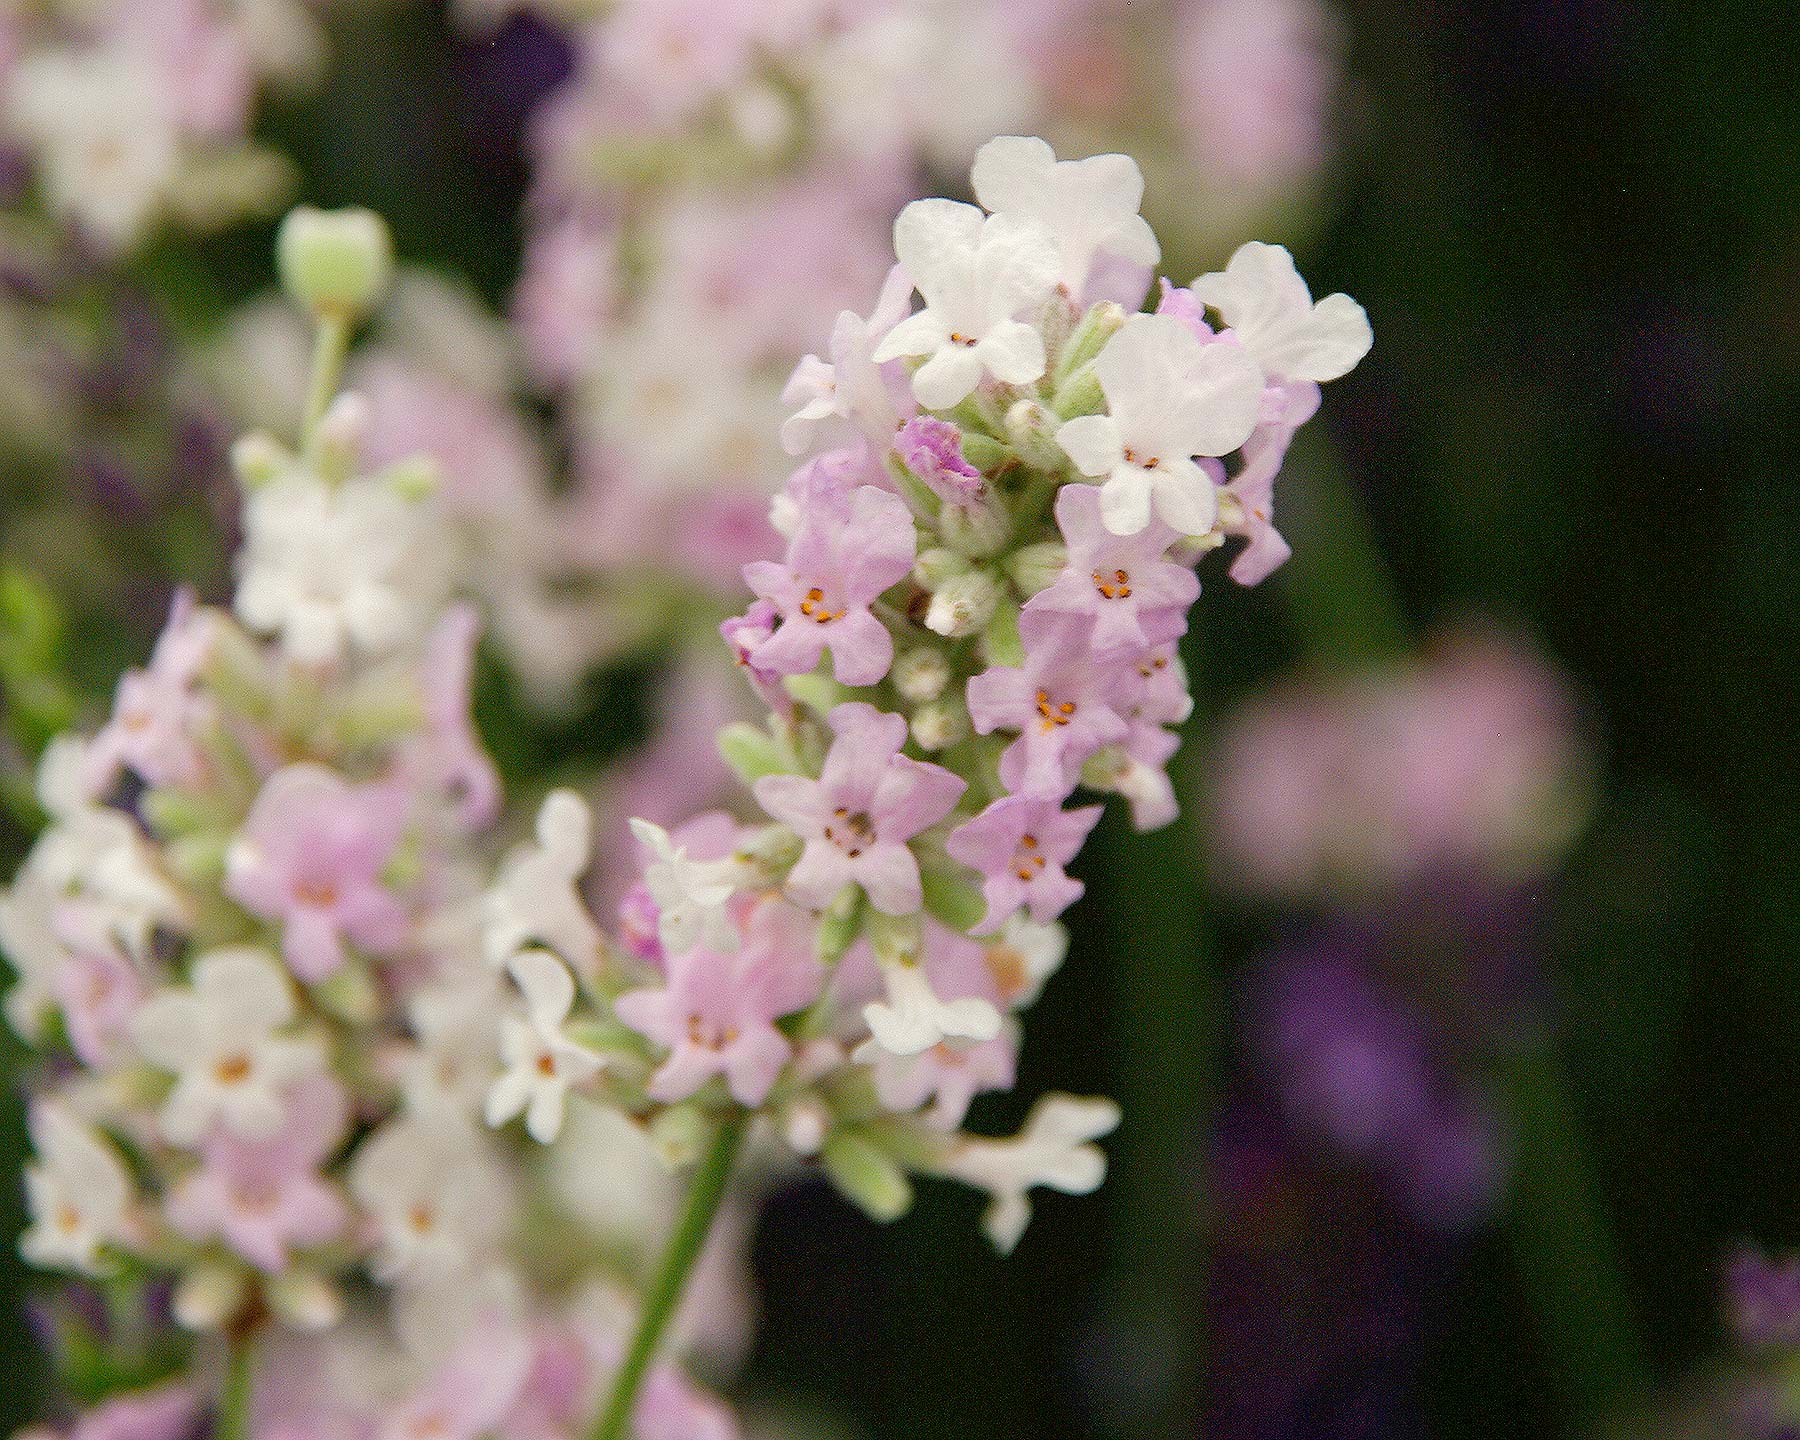 Lavandula angustifolia - new variety 'Hidcote Pink' has a flower spike of pink and white flowers